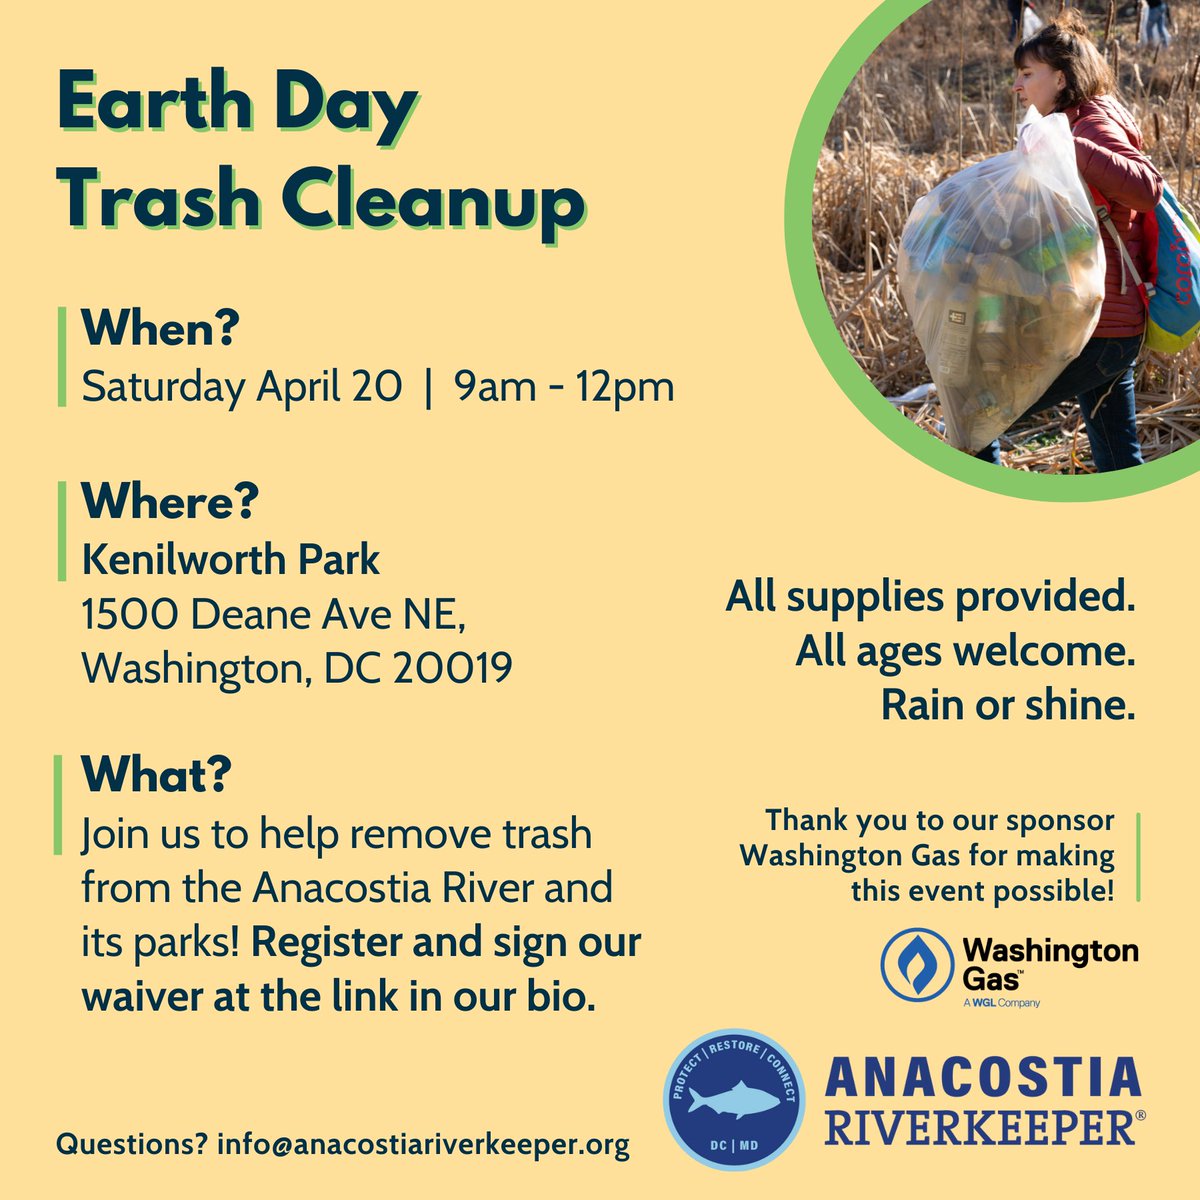 Join us on Earth Day to clean the Anacostia River! 🌎 We’re hosting a community trash cleanup at Kenilworth Park next Saturday April 20th from 9am-12pm. Thank you to @washingtongas for sponsoring this cleanup. #TrashFreeDC Register here: shorturl.at/cjvGJ